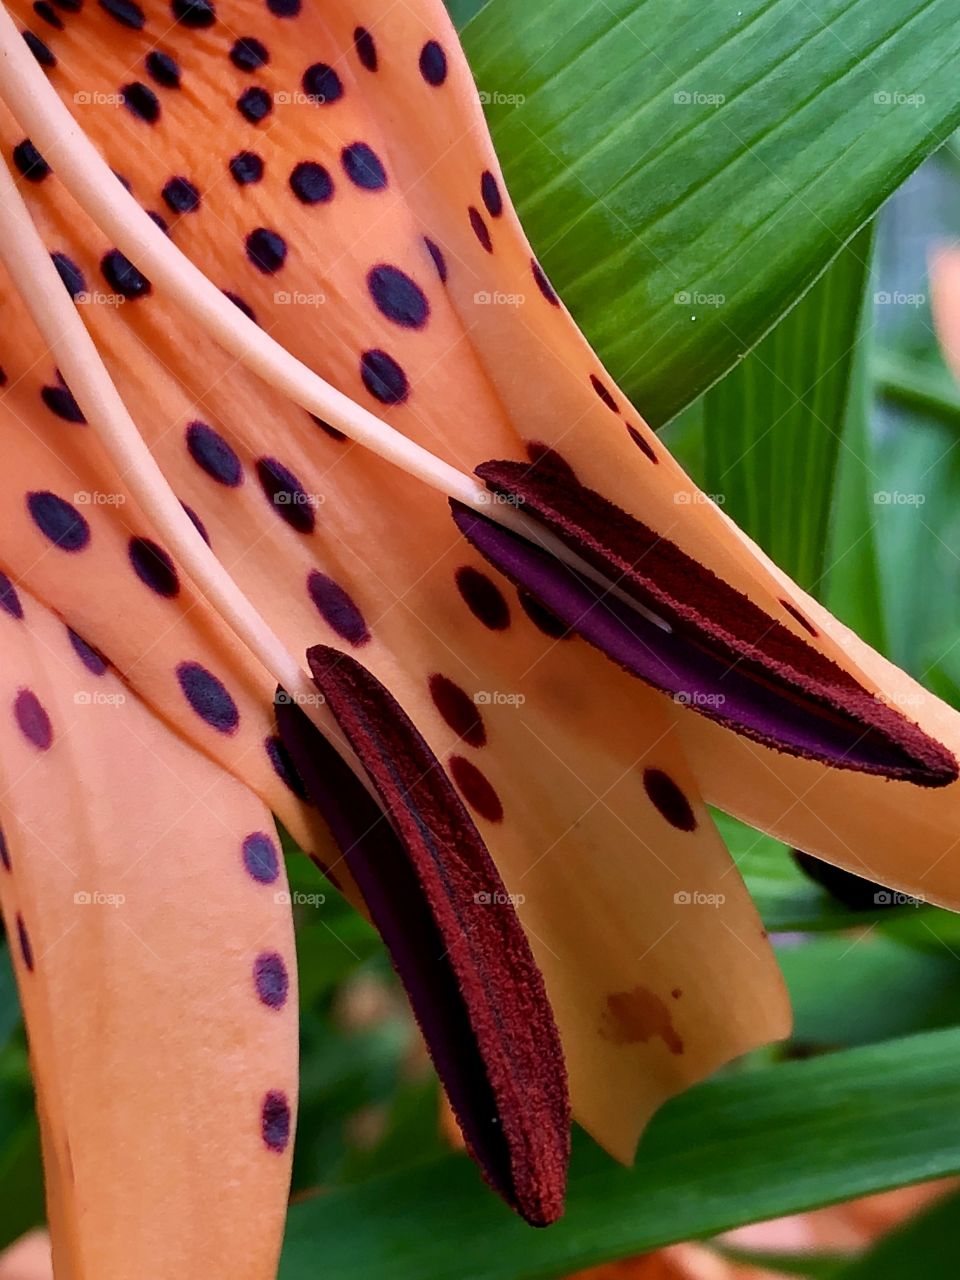 Tiger lily’s stamen in closeup perspective brings its’ spots into focus and detailed pollen location.